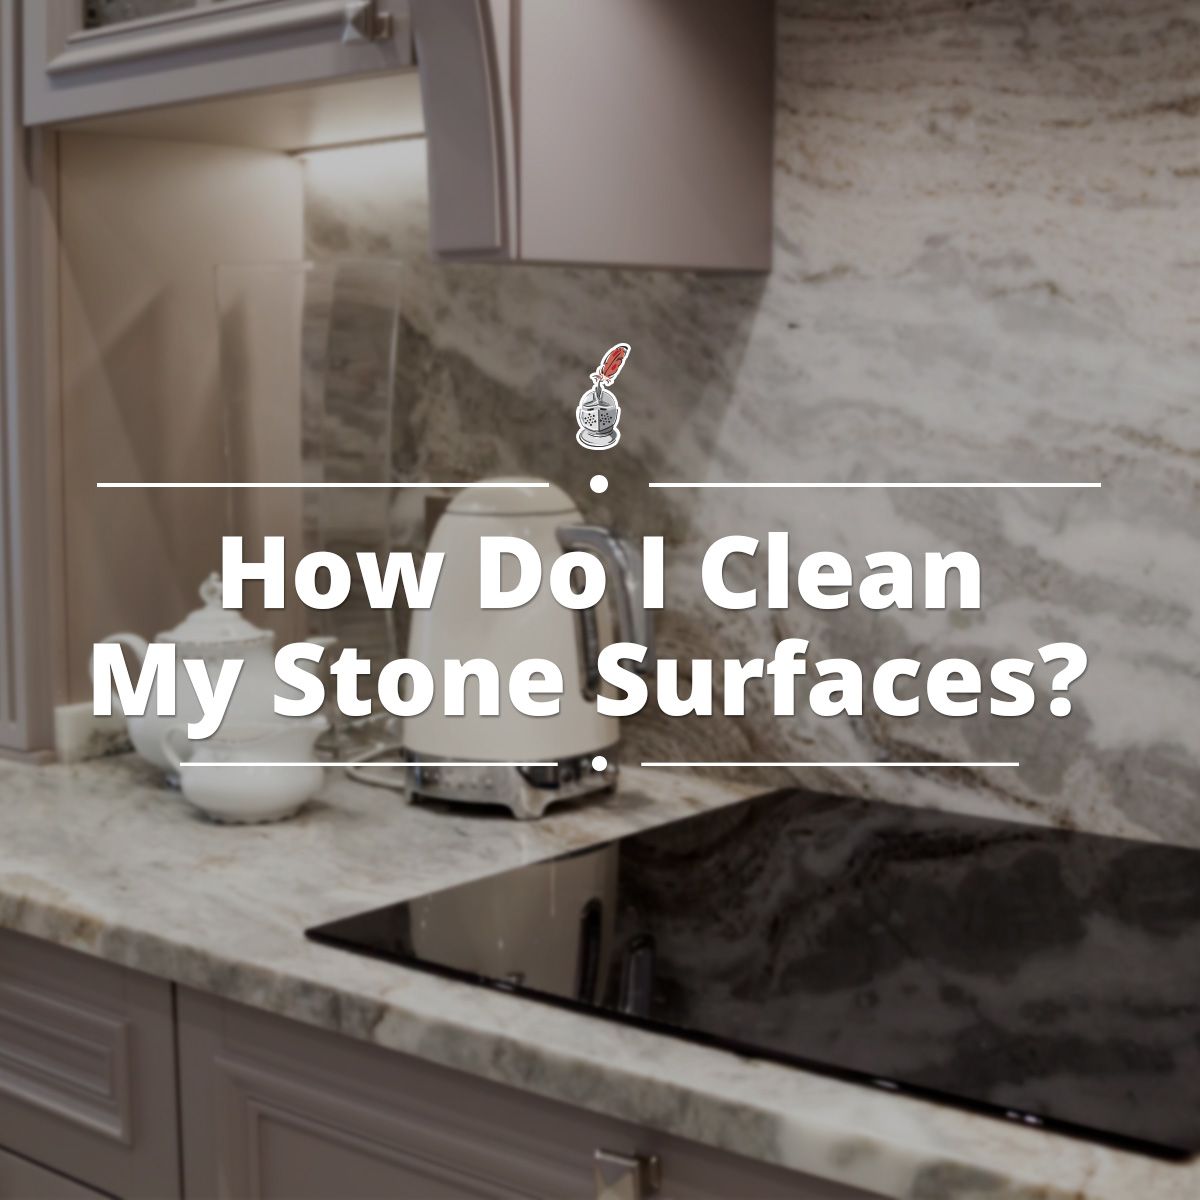 How Do I Clean My Stone Surfaces?